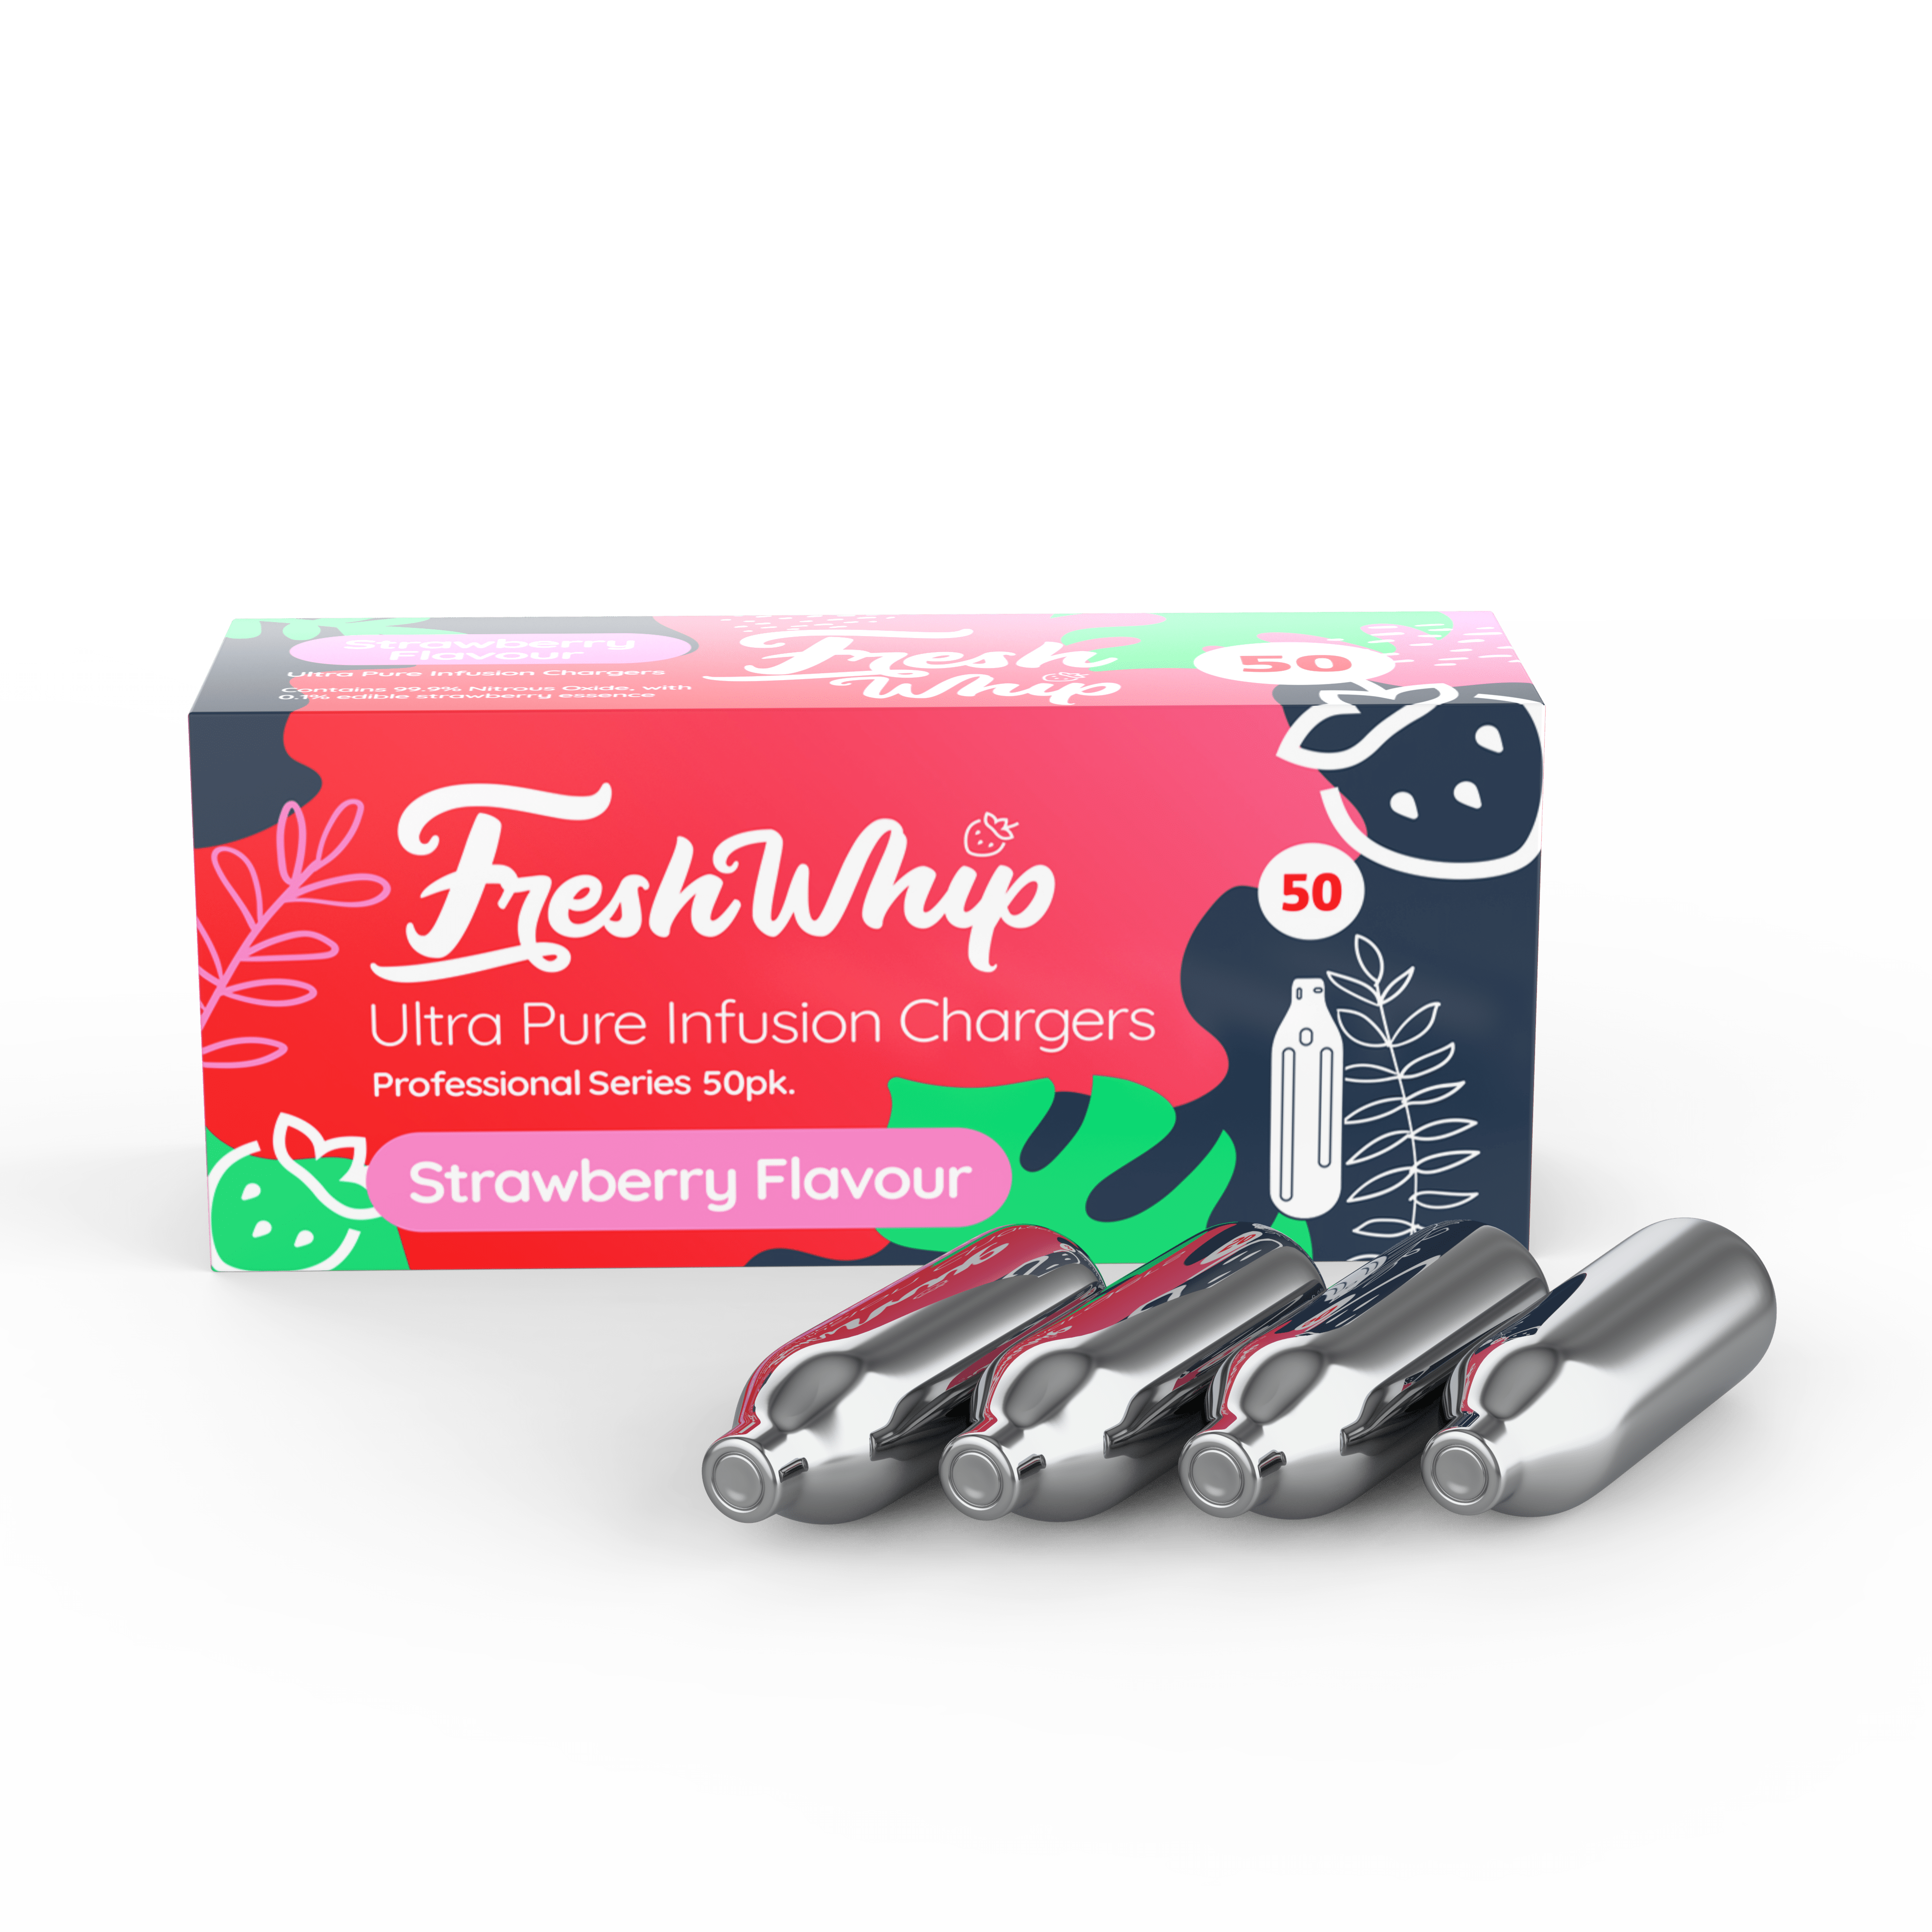 FreshWhip Strawberry Infusion Chargers 8.2g - 50pks